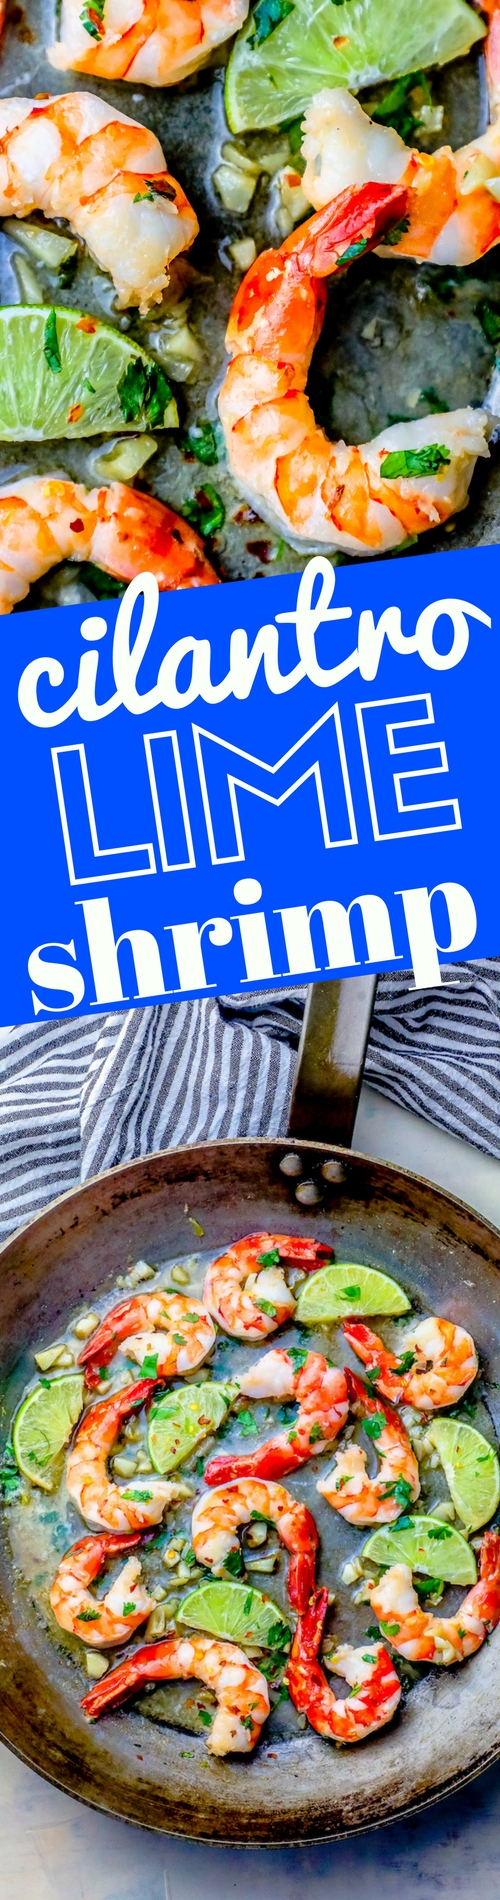 shrimp, limes, and cilantro in a pan